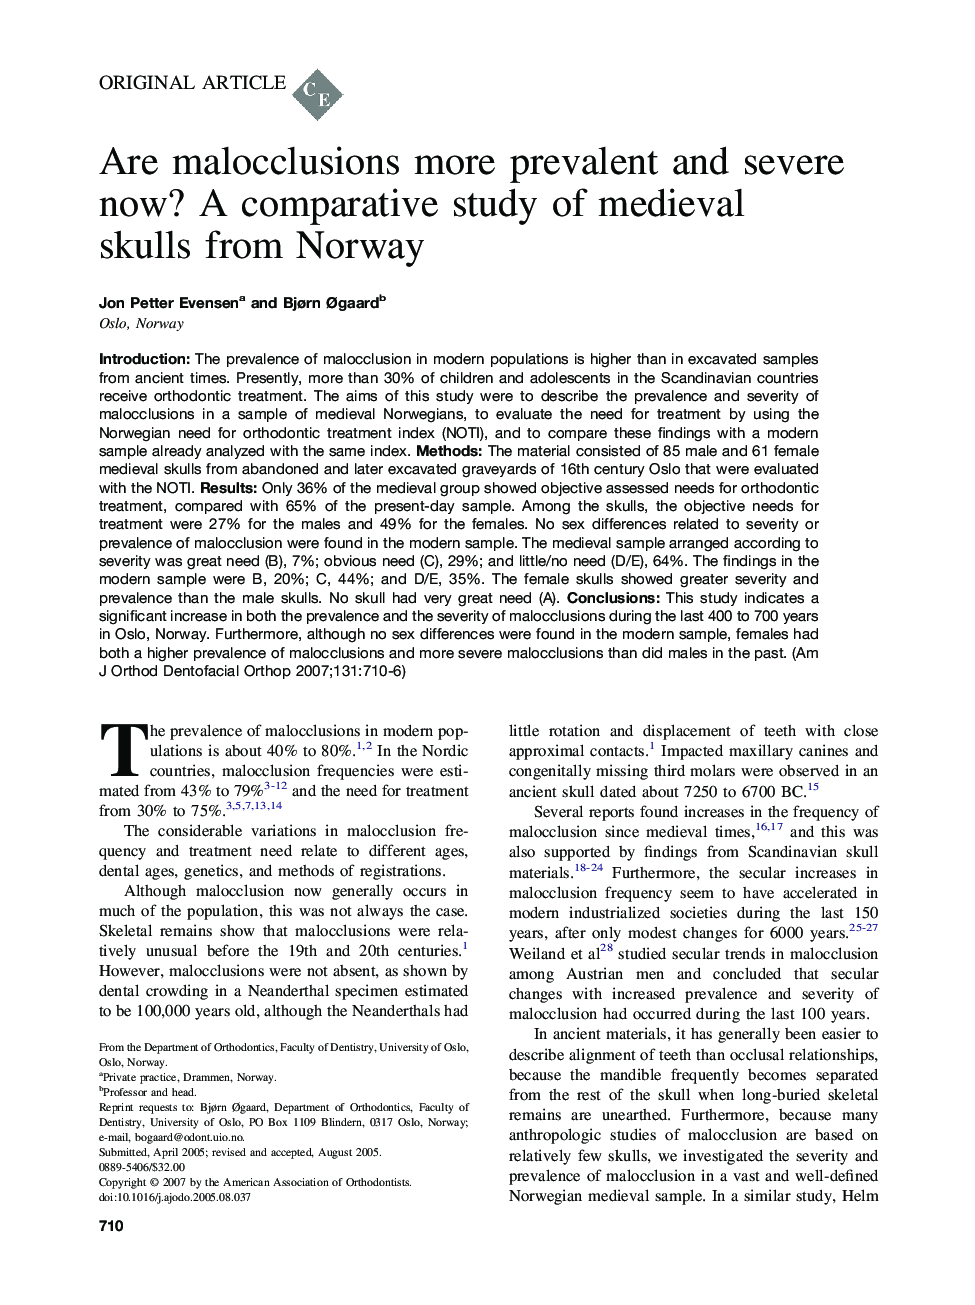 Are malocclusions more prevalent and severe now? A comparative study of medieval skulls from Norway